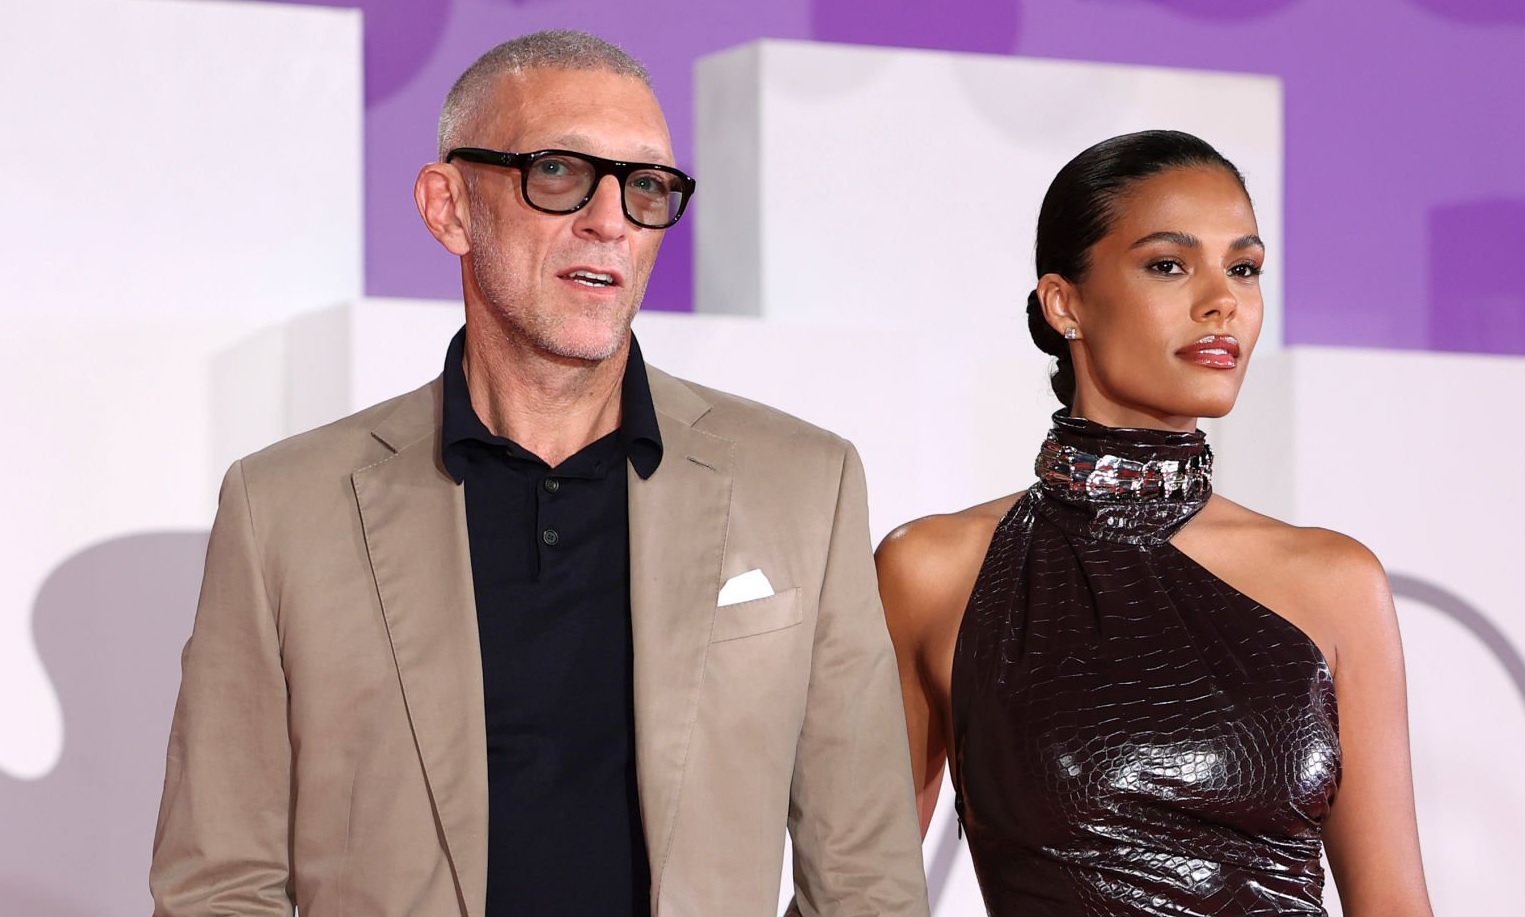 Vincent Cassel and Tina Kunakey attended the 79th Venice International Film Festival 